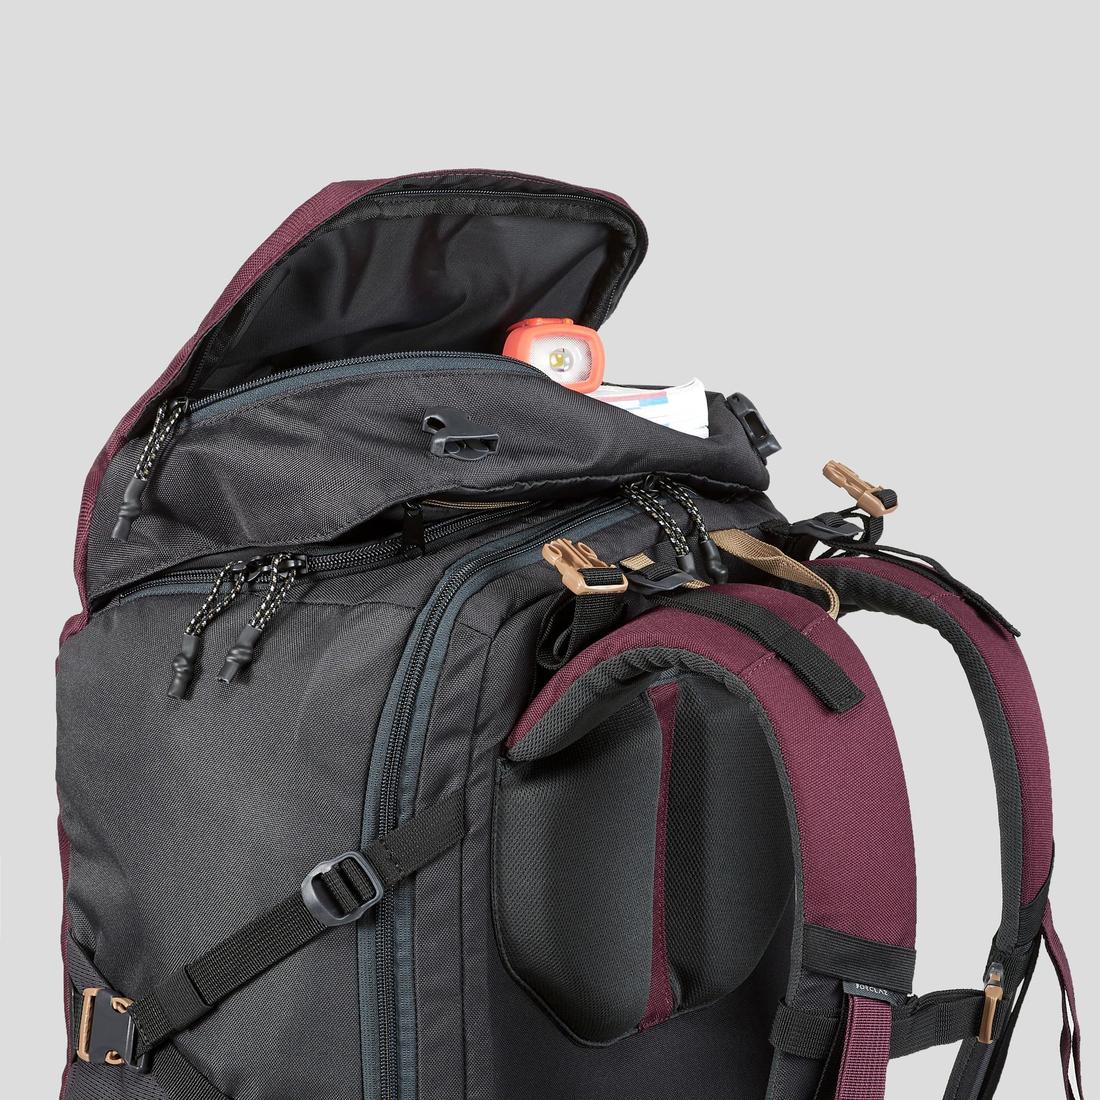 forclaz backpack travel 100 40l review